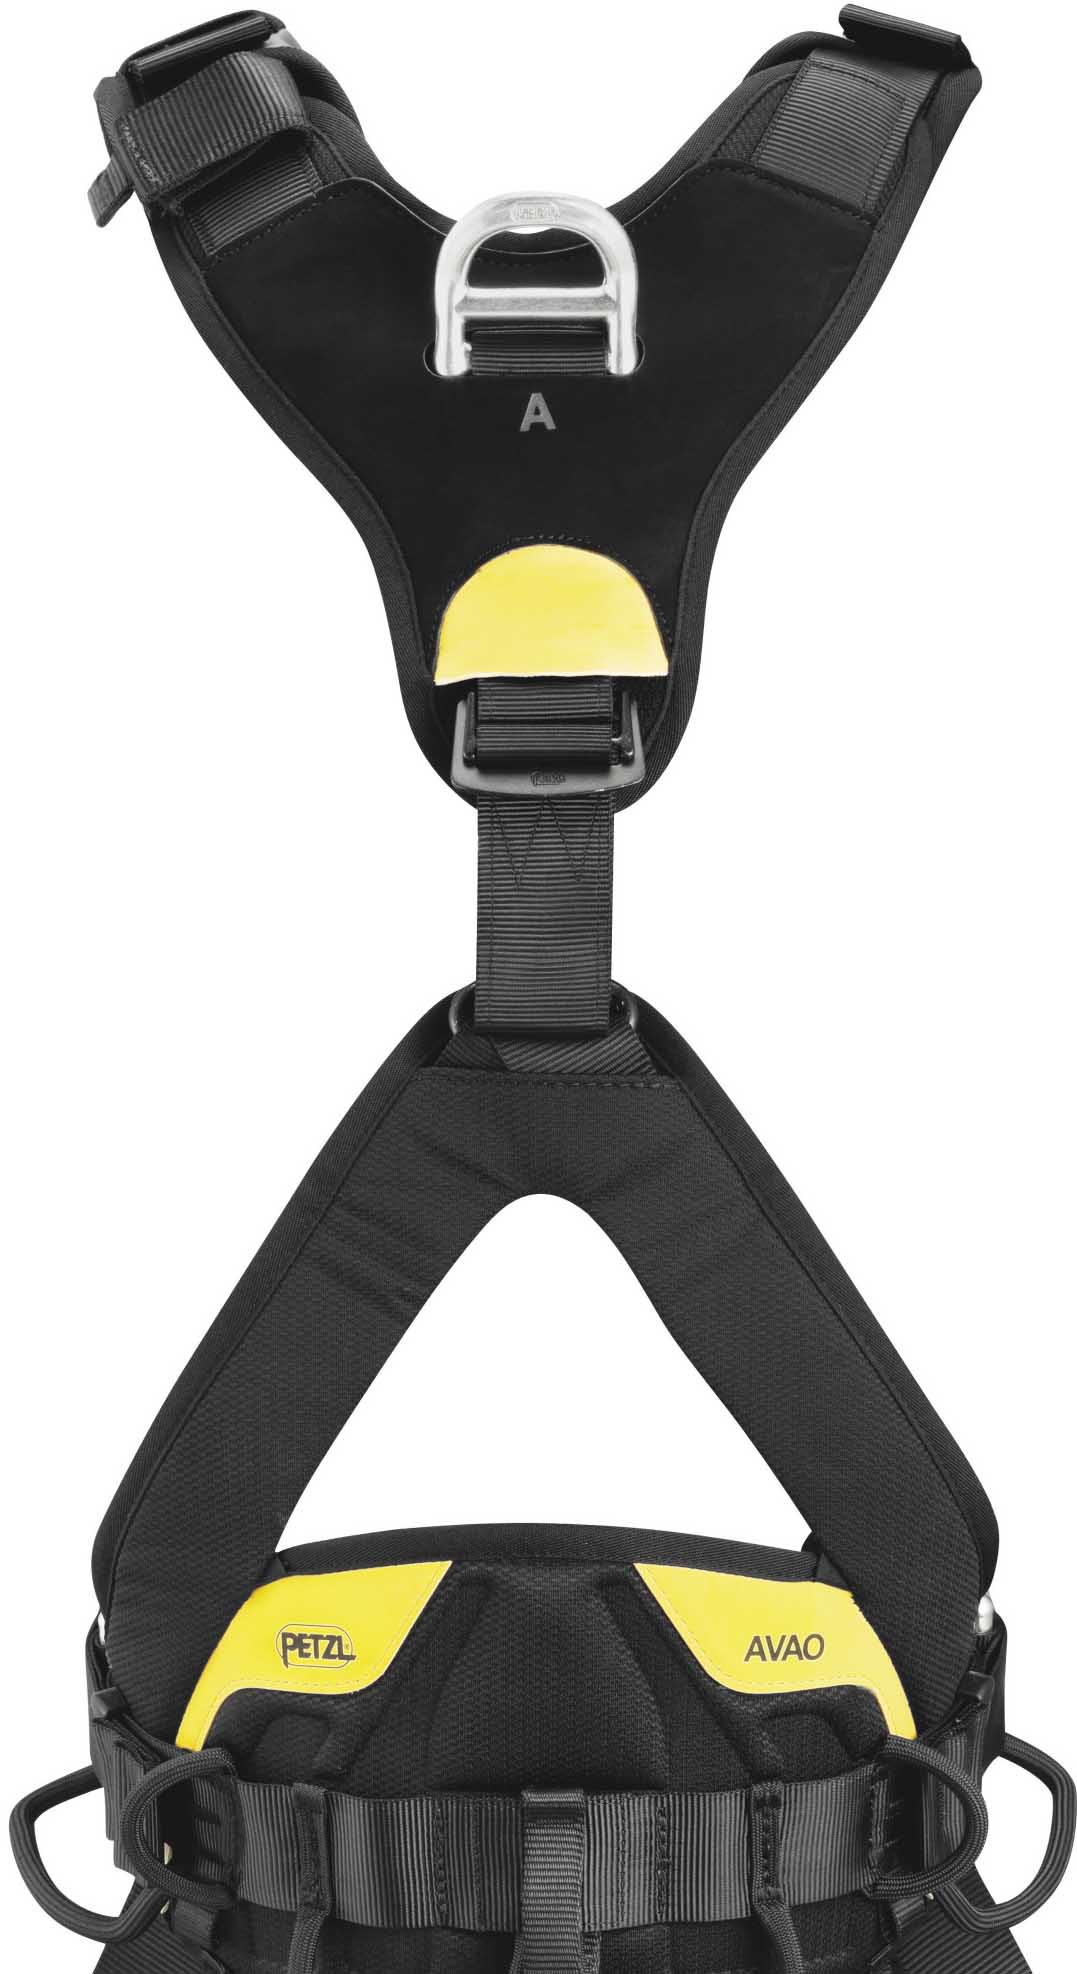 Petzl AVAO BOD Harness from Columbia Safety